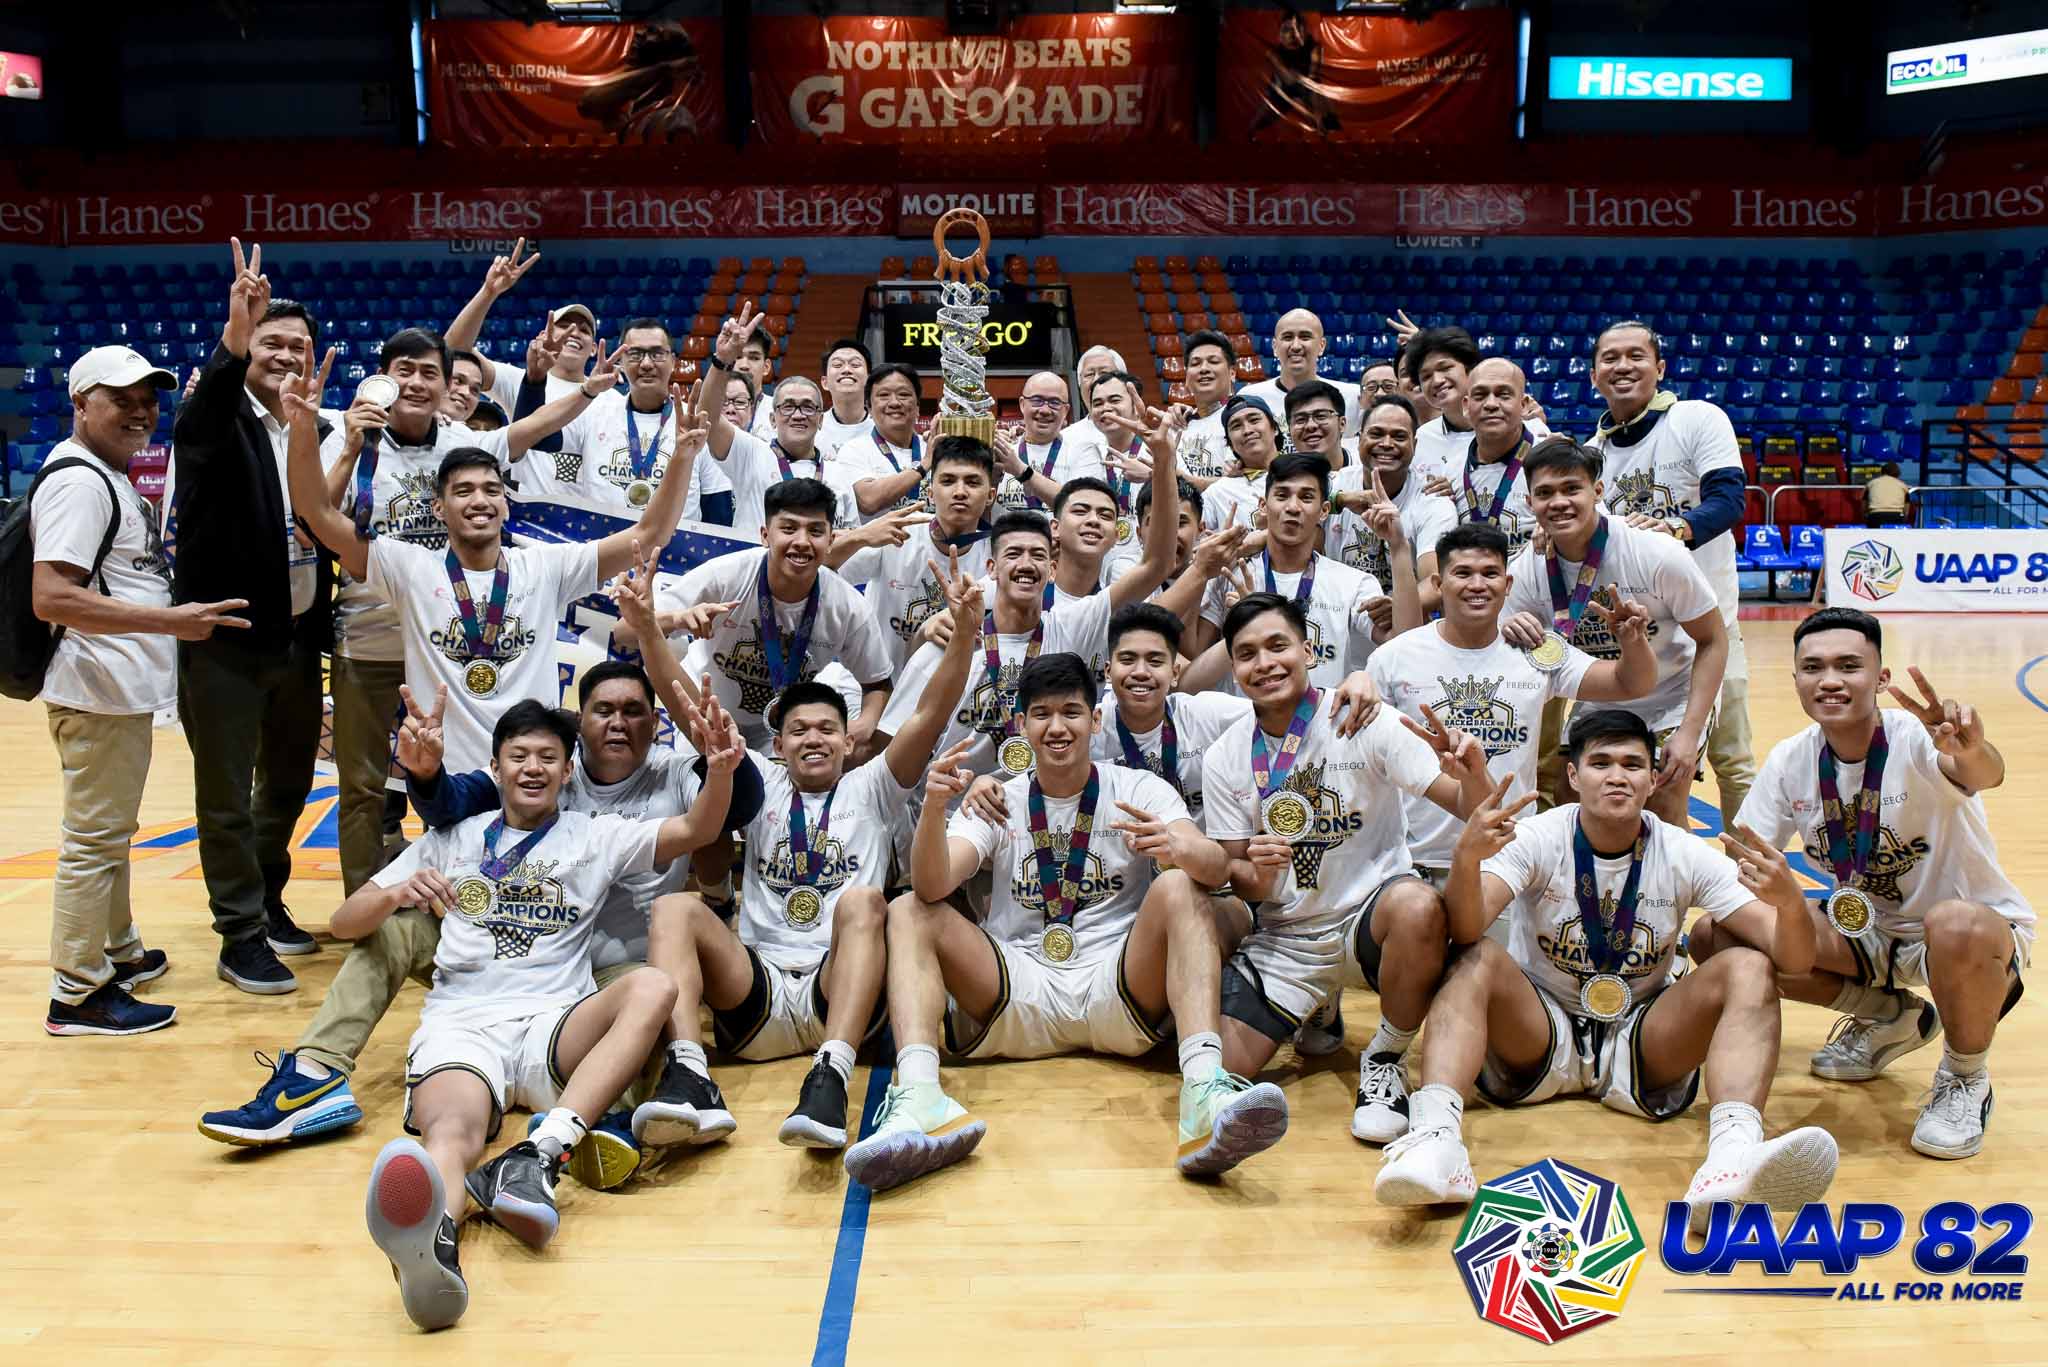 UAAP82-BOYS-BB-AWARDING-CEREMONIES-3RD-PHOTO-NU Just as Nierva hoped, NU now place-to-be, Lady Bulldogs now team-to-beat News NU UAAP Volleyball  - philippine sports news